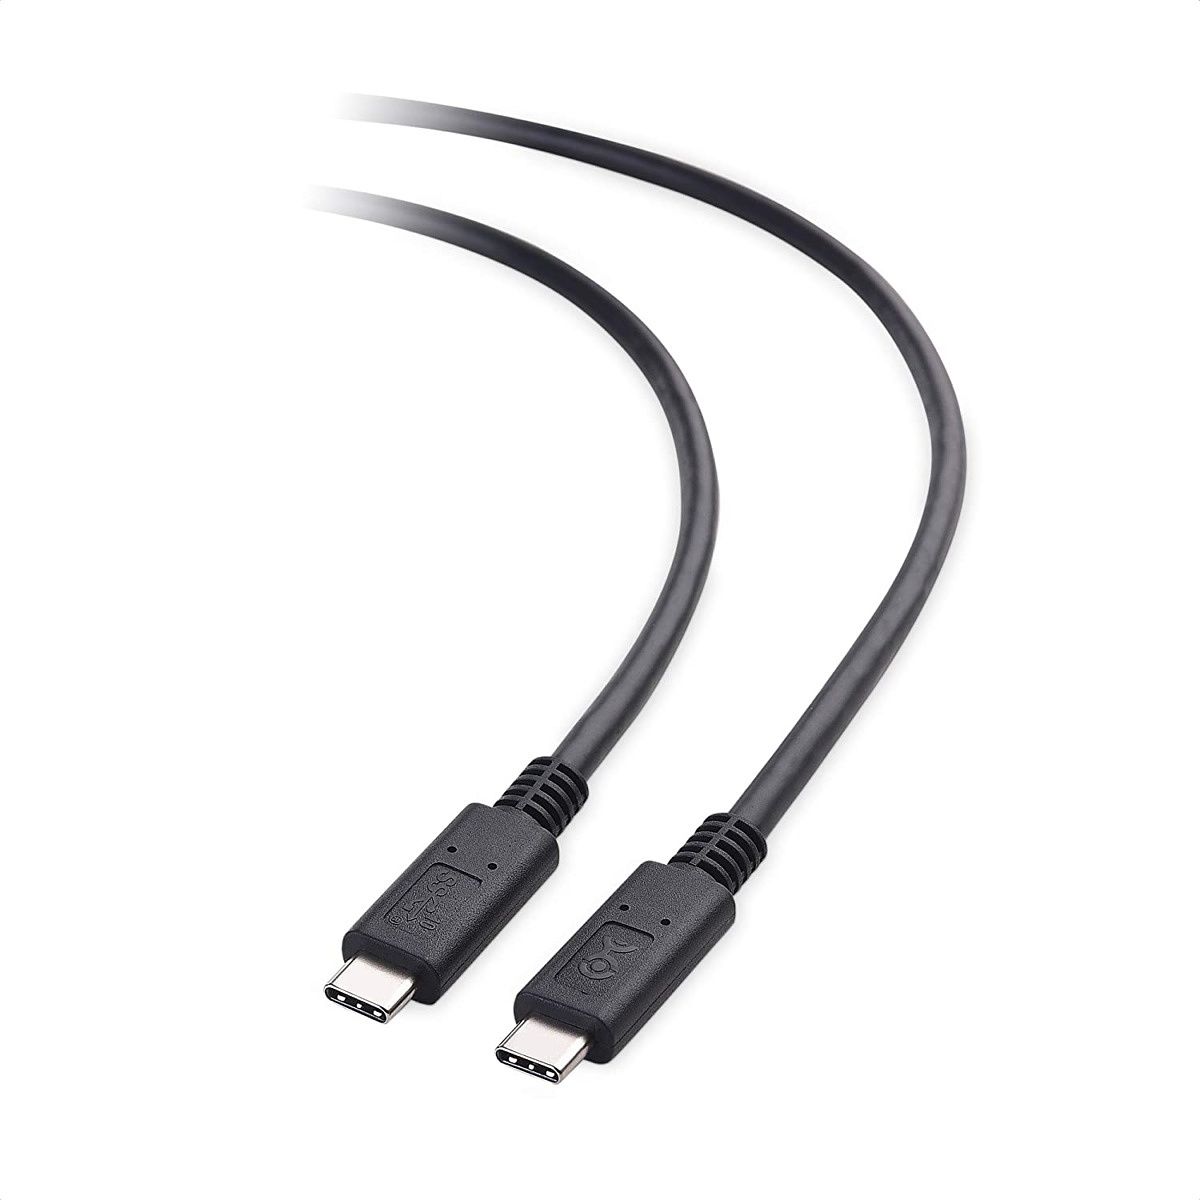 If you’re looking for a great cable that can provide 100W charging and 10Gbps data transfer, this Cable Matters cable is a good option. It's decently priced and comes in both white as well as black color options.